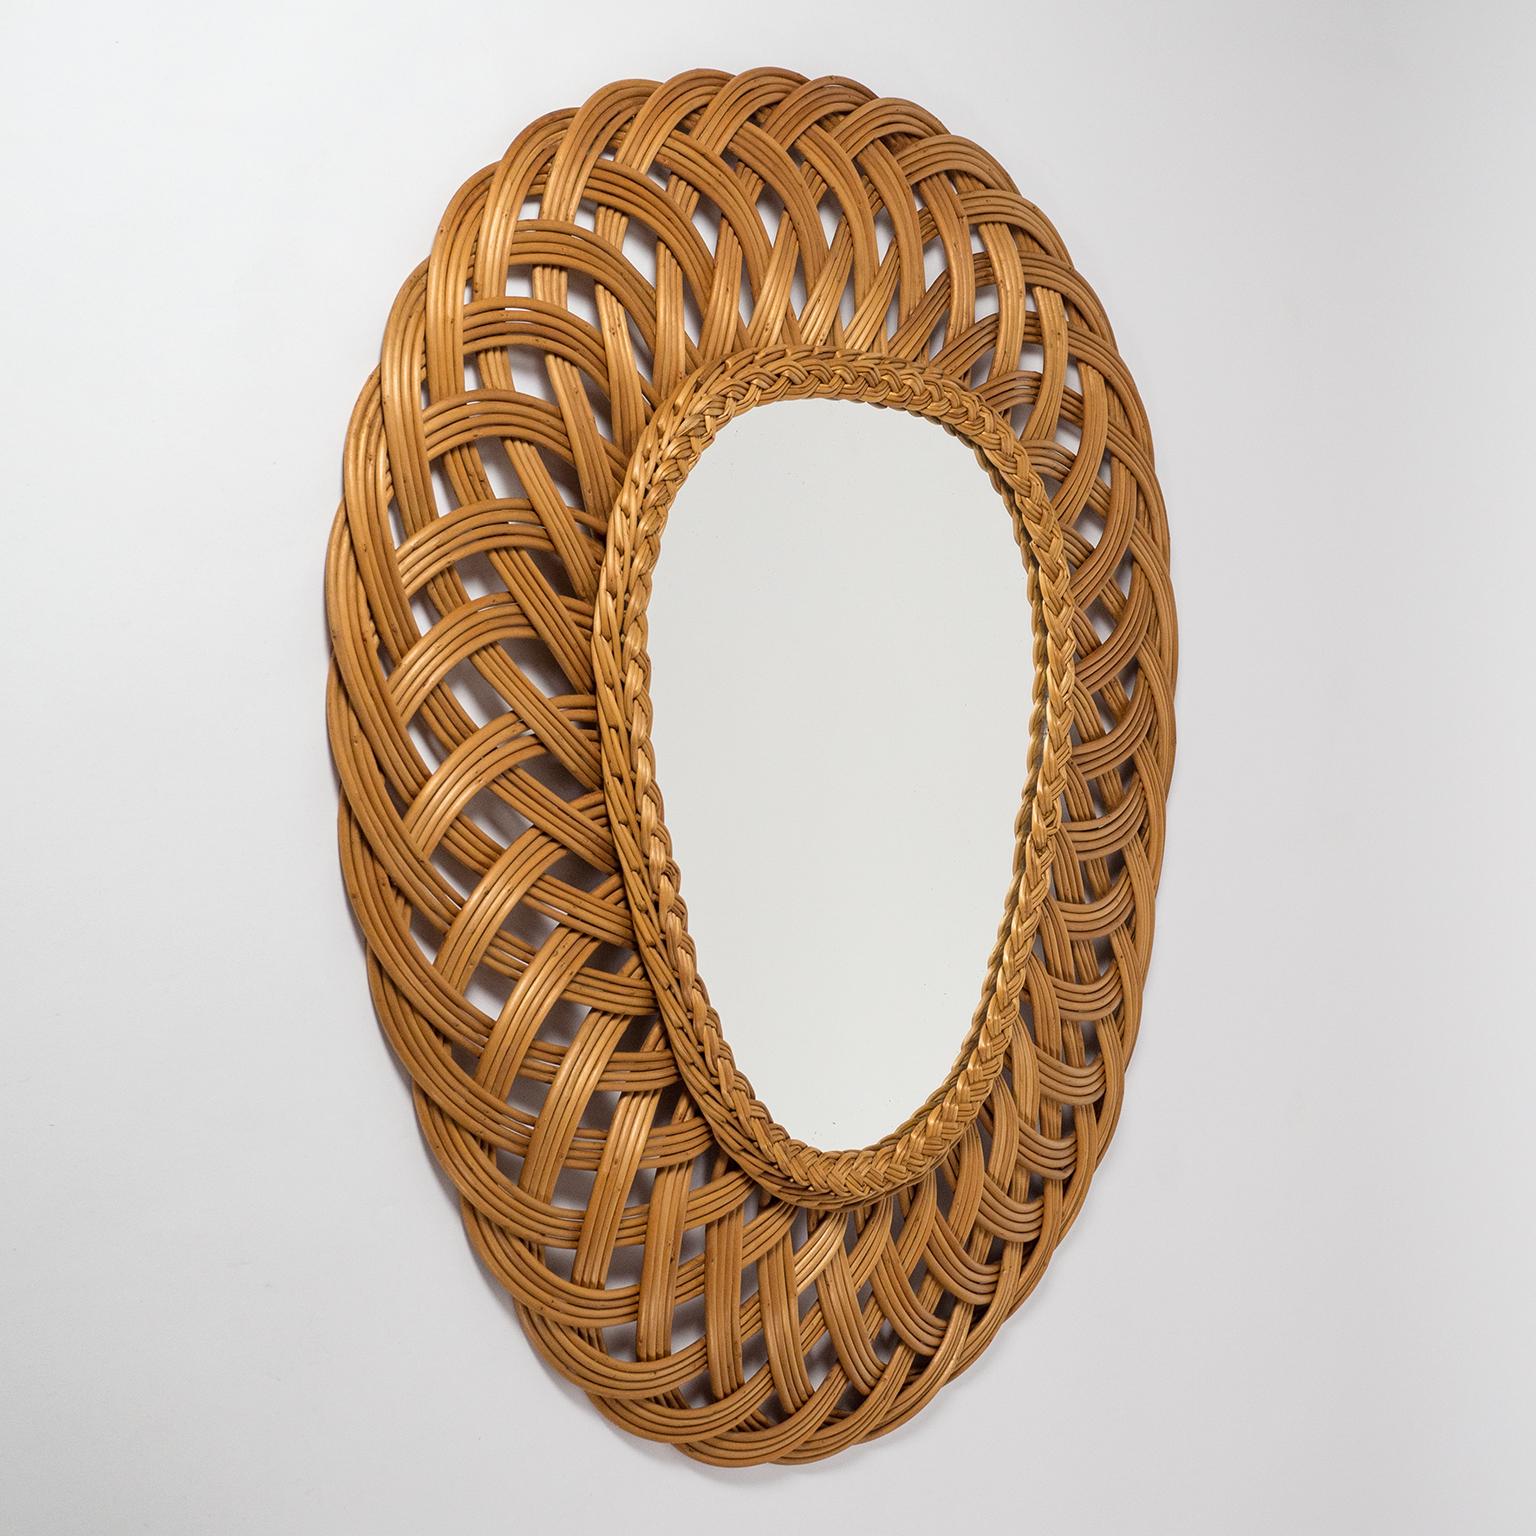 Very unique French artisanal rattan mirror from the late 1960s or early 1970s. Large oval frame made of 